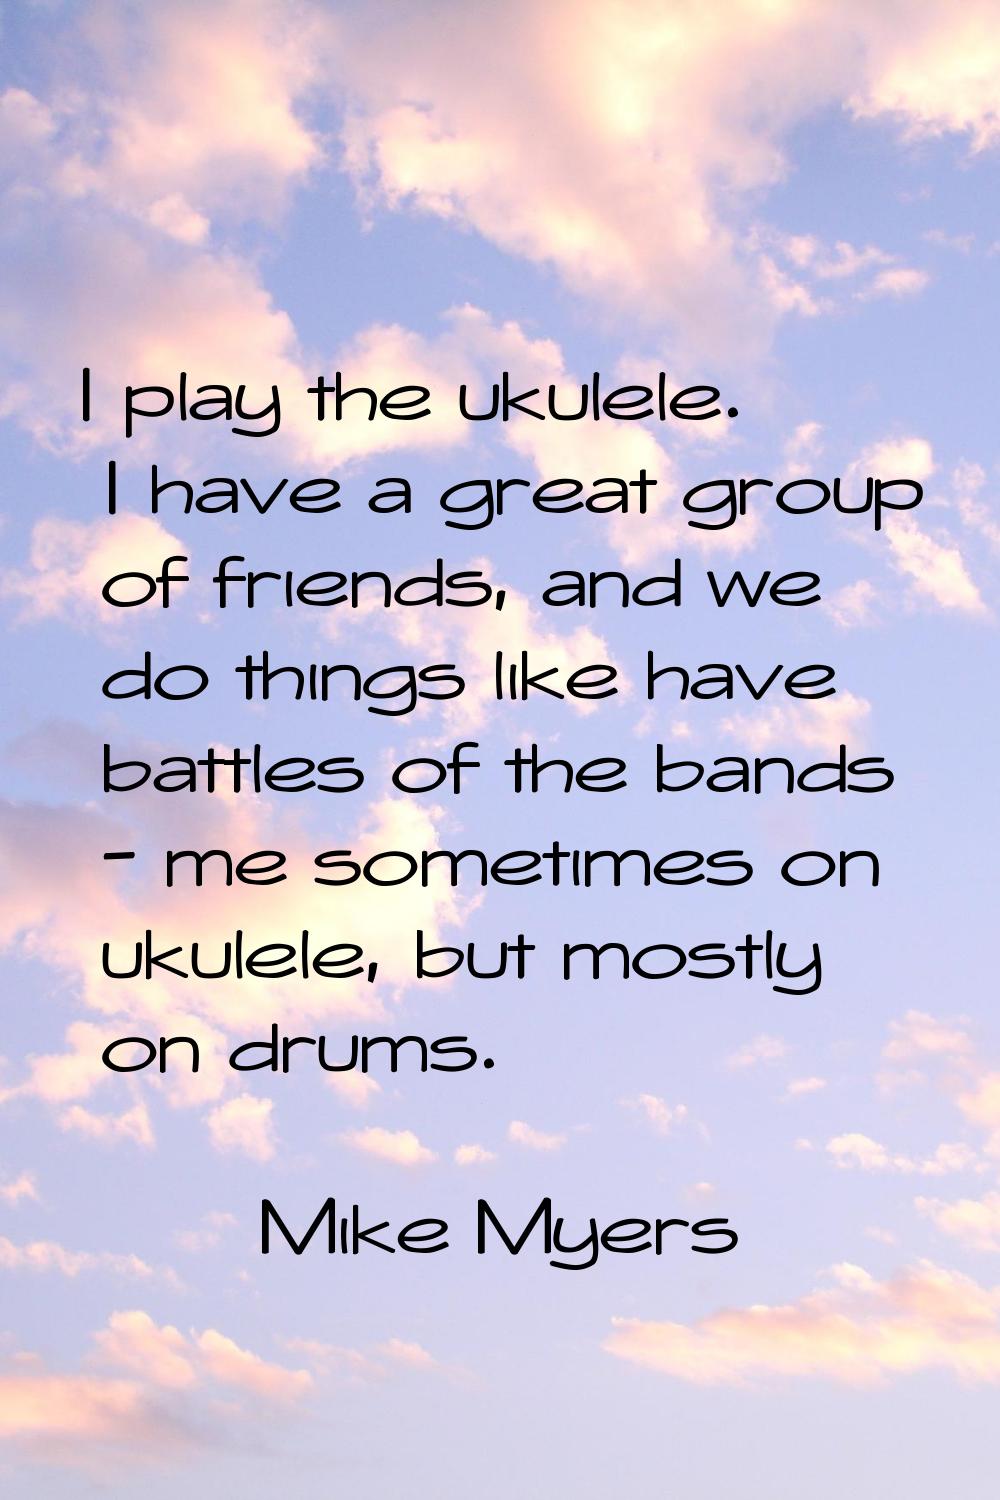 I play the ukulele. I have a great group of friends, and we do things like have battles of the band